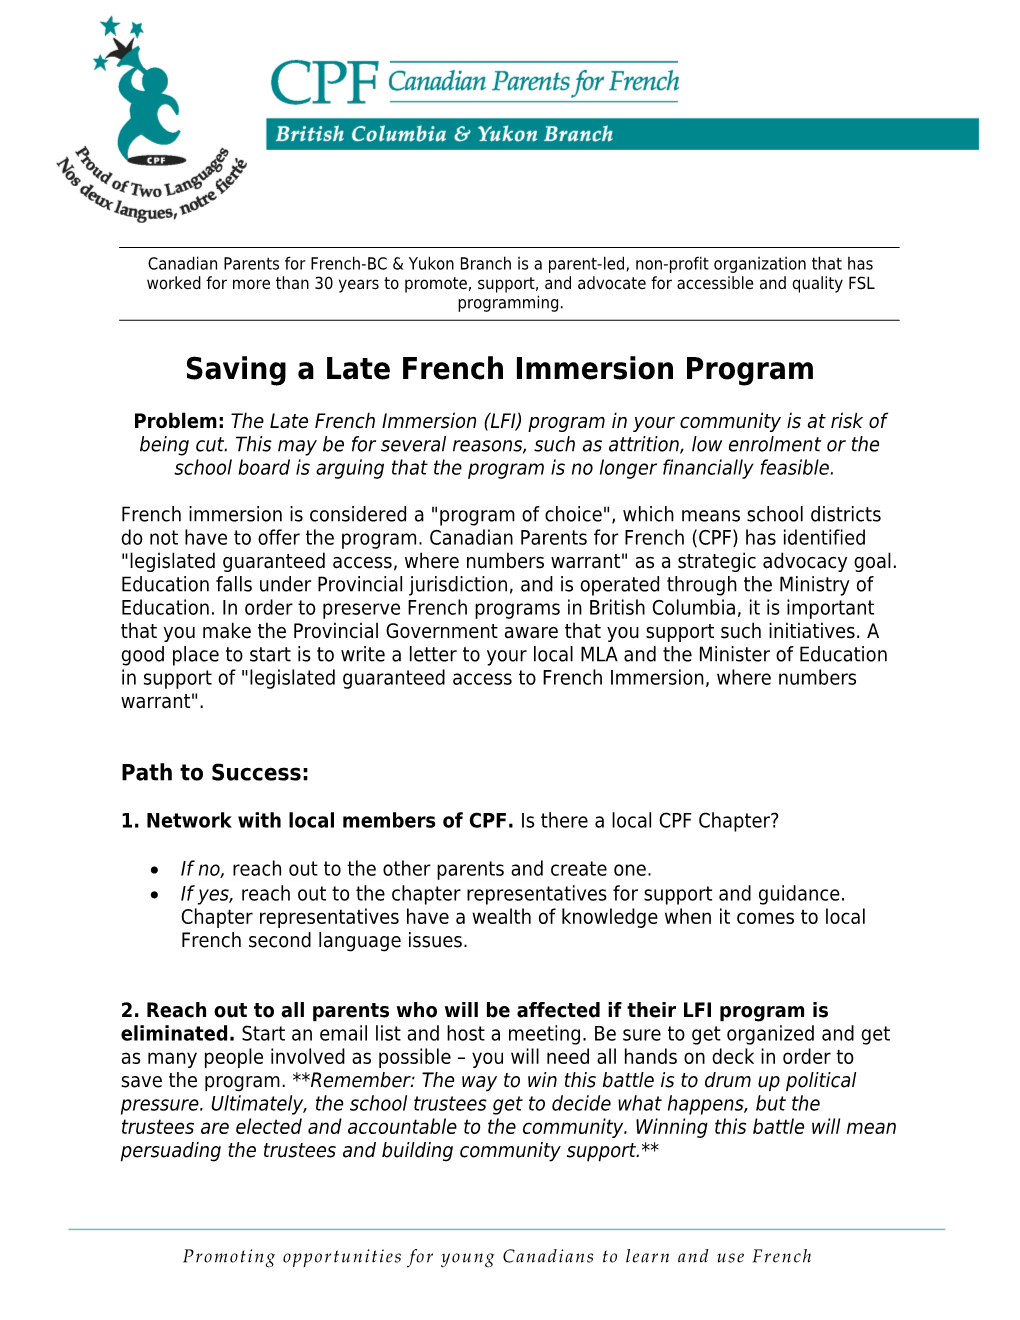 Saving a Late French Immersion Program